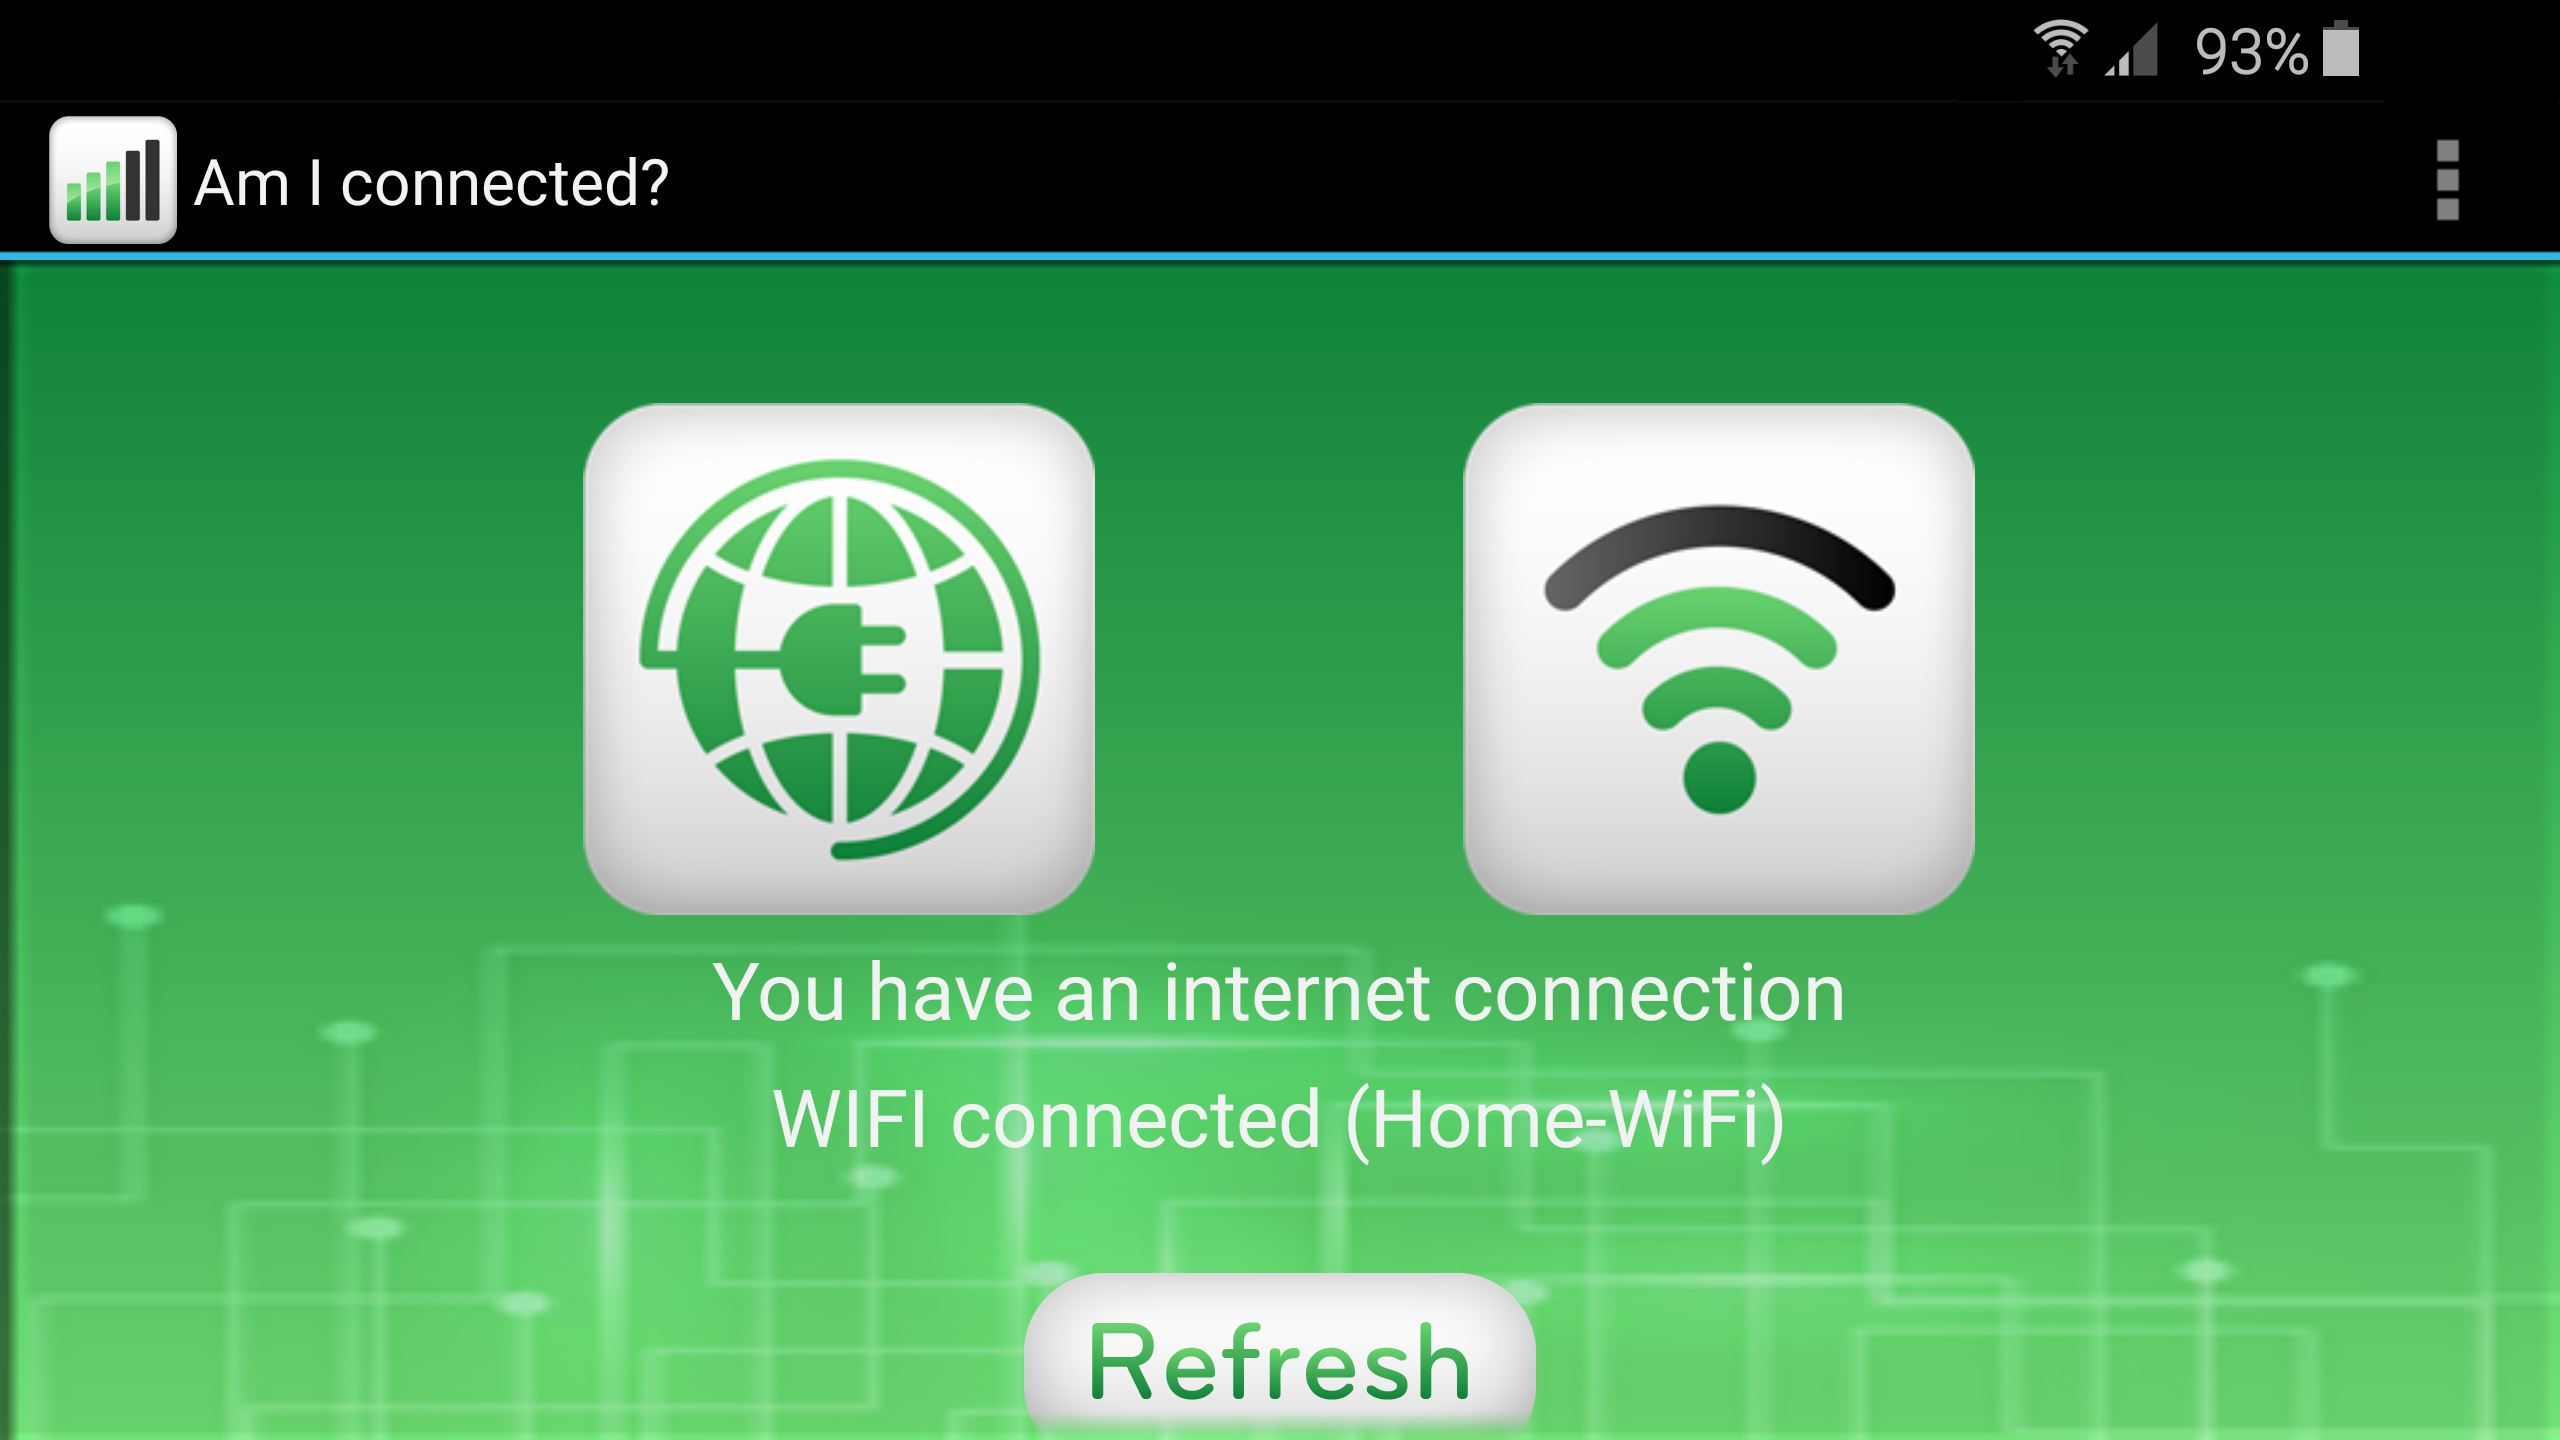 'Am I connected' app-screen